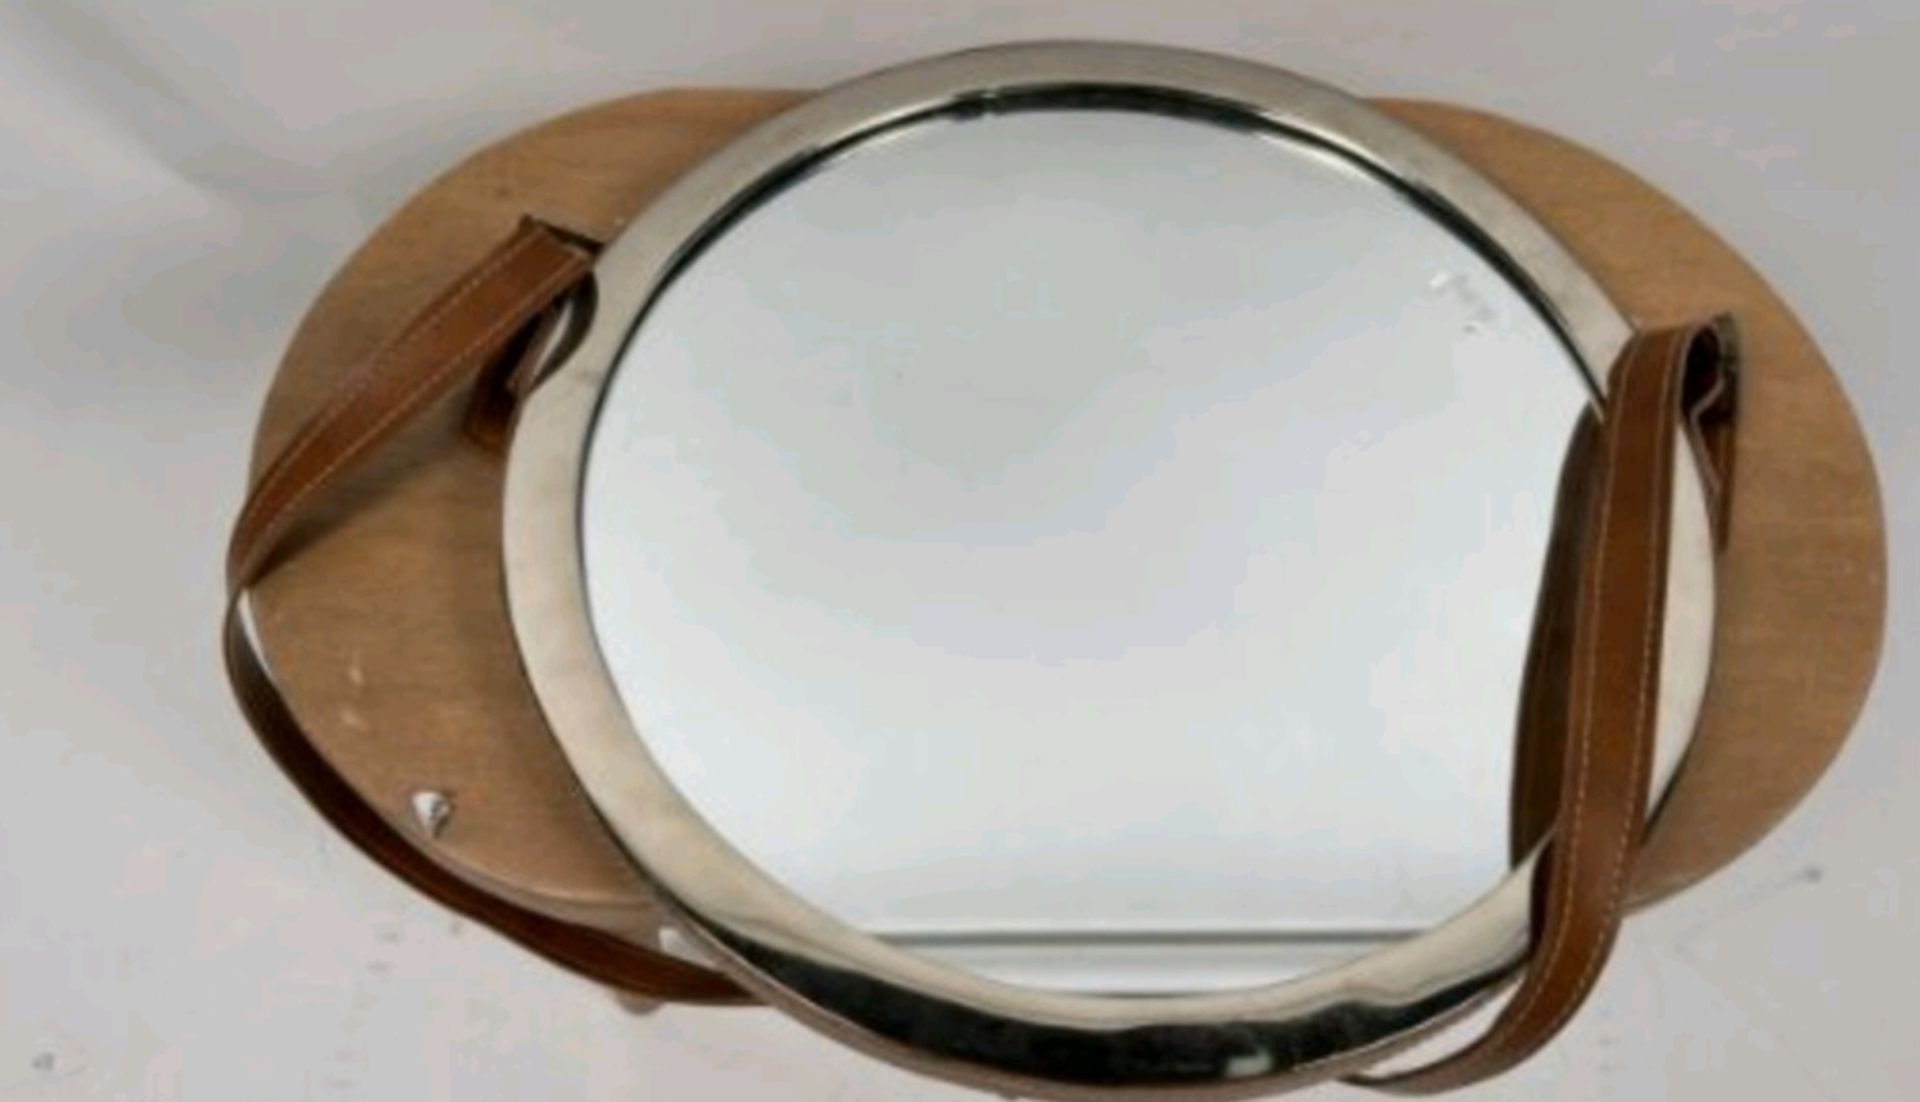 Circular Wall Mirror With Leather Strap - Image 2 of 4